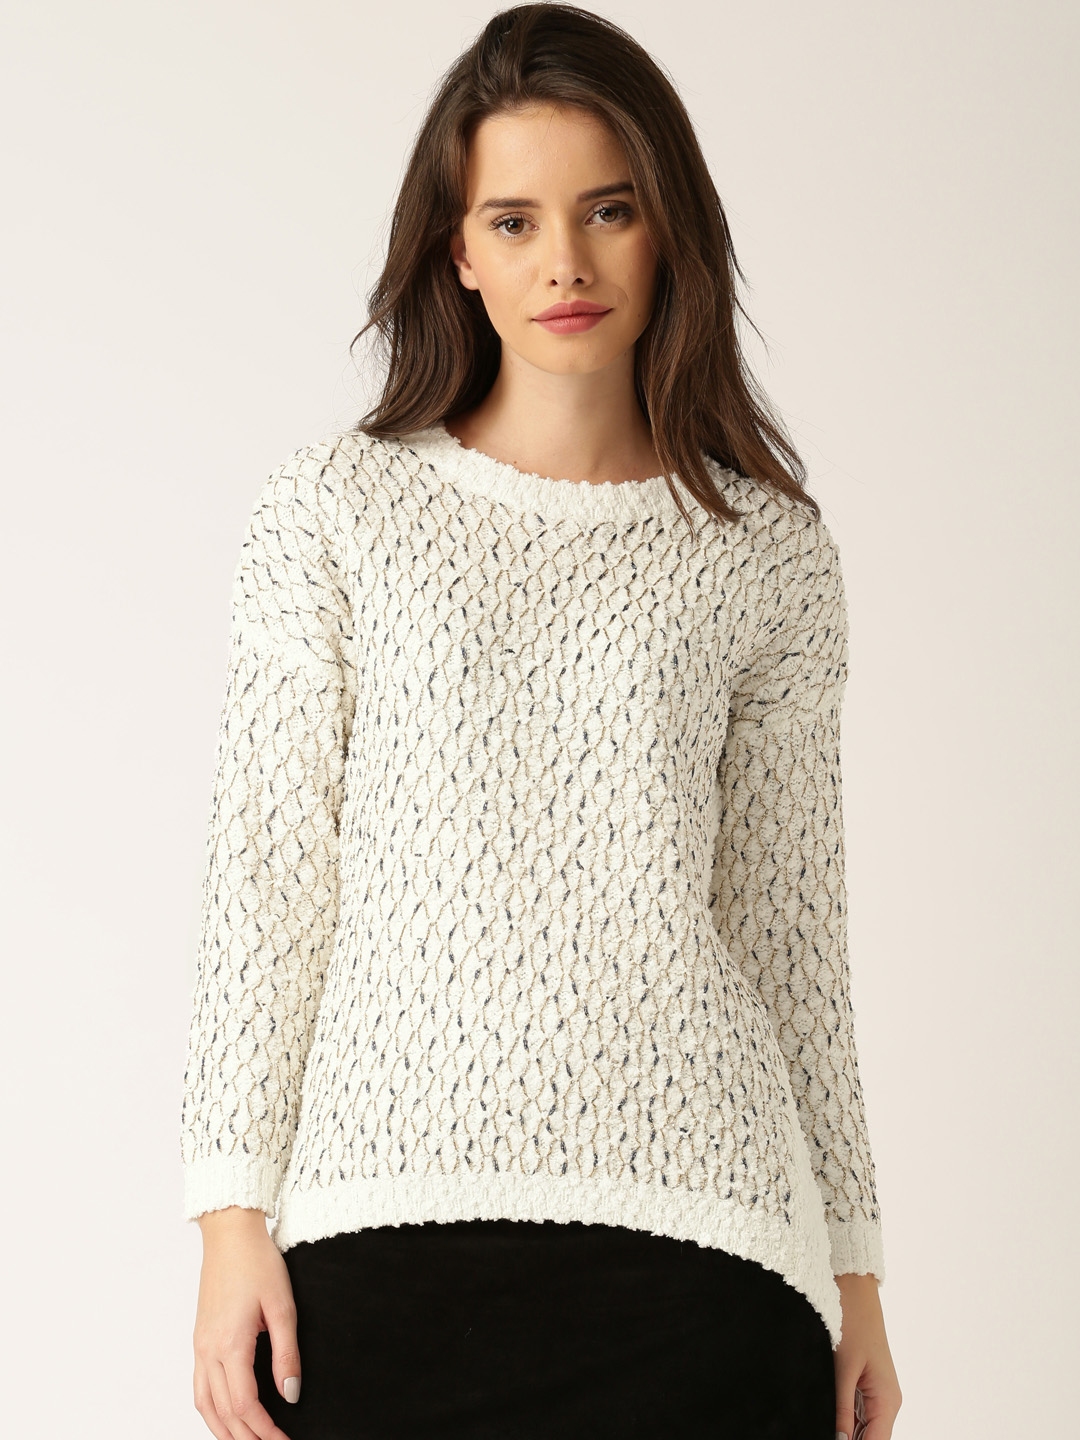 Buy DressBerry Off White Boucle Knit Sweater - Sweaters for Women